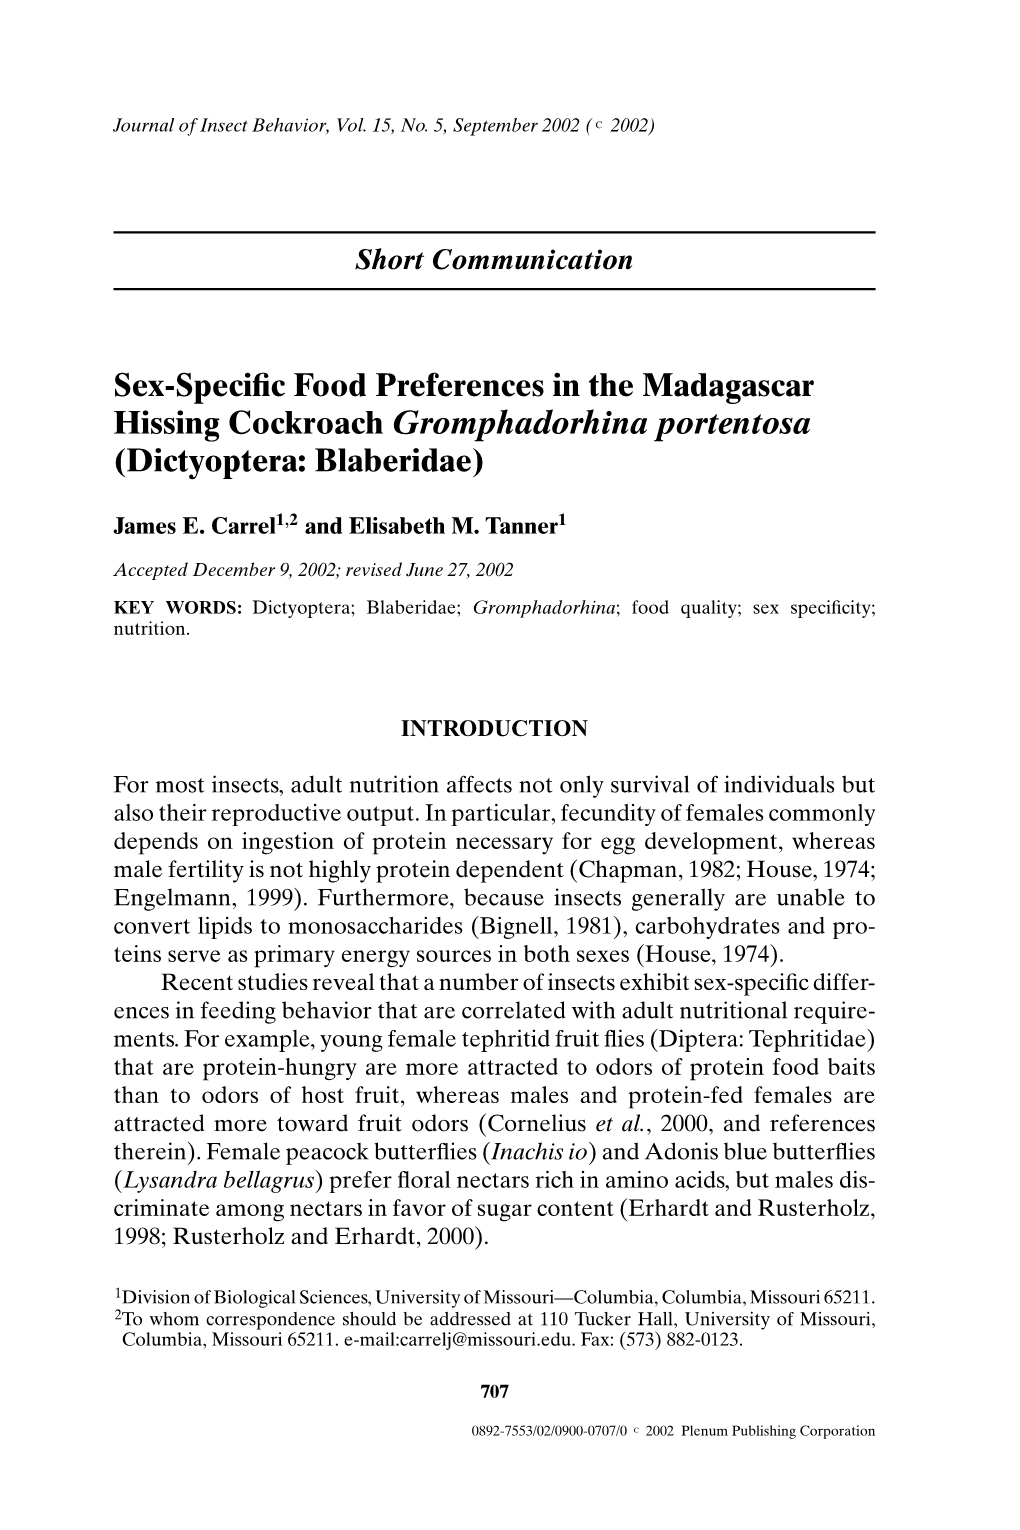 Sex-Specific Food Preferences in the Madagascar